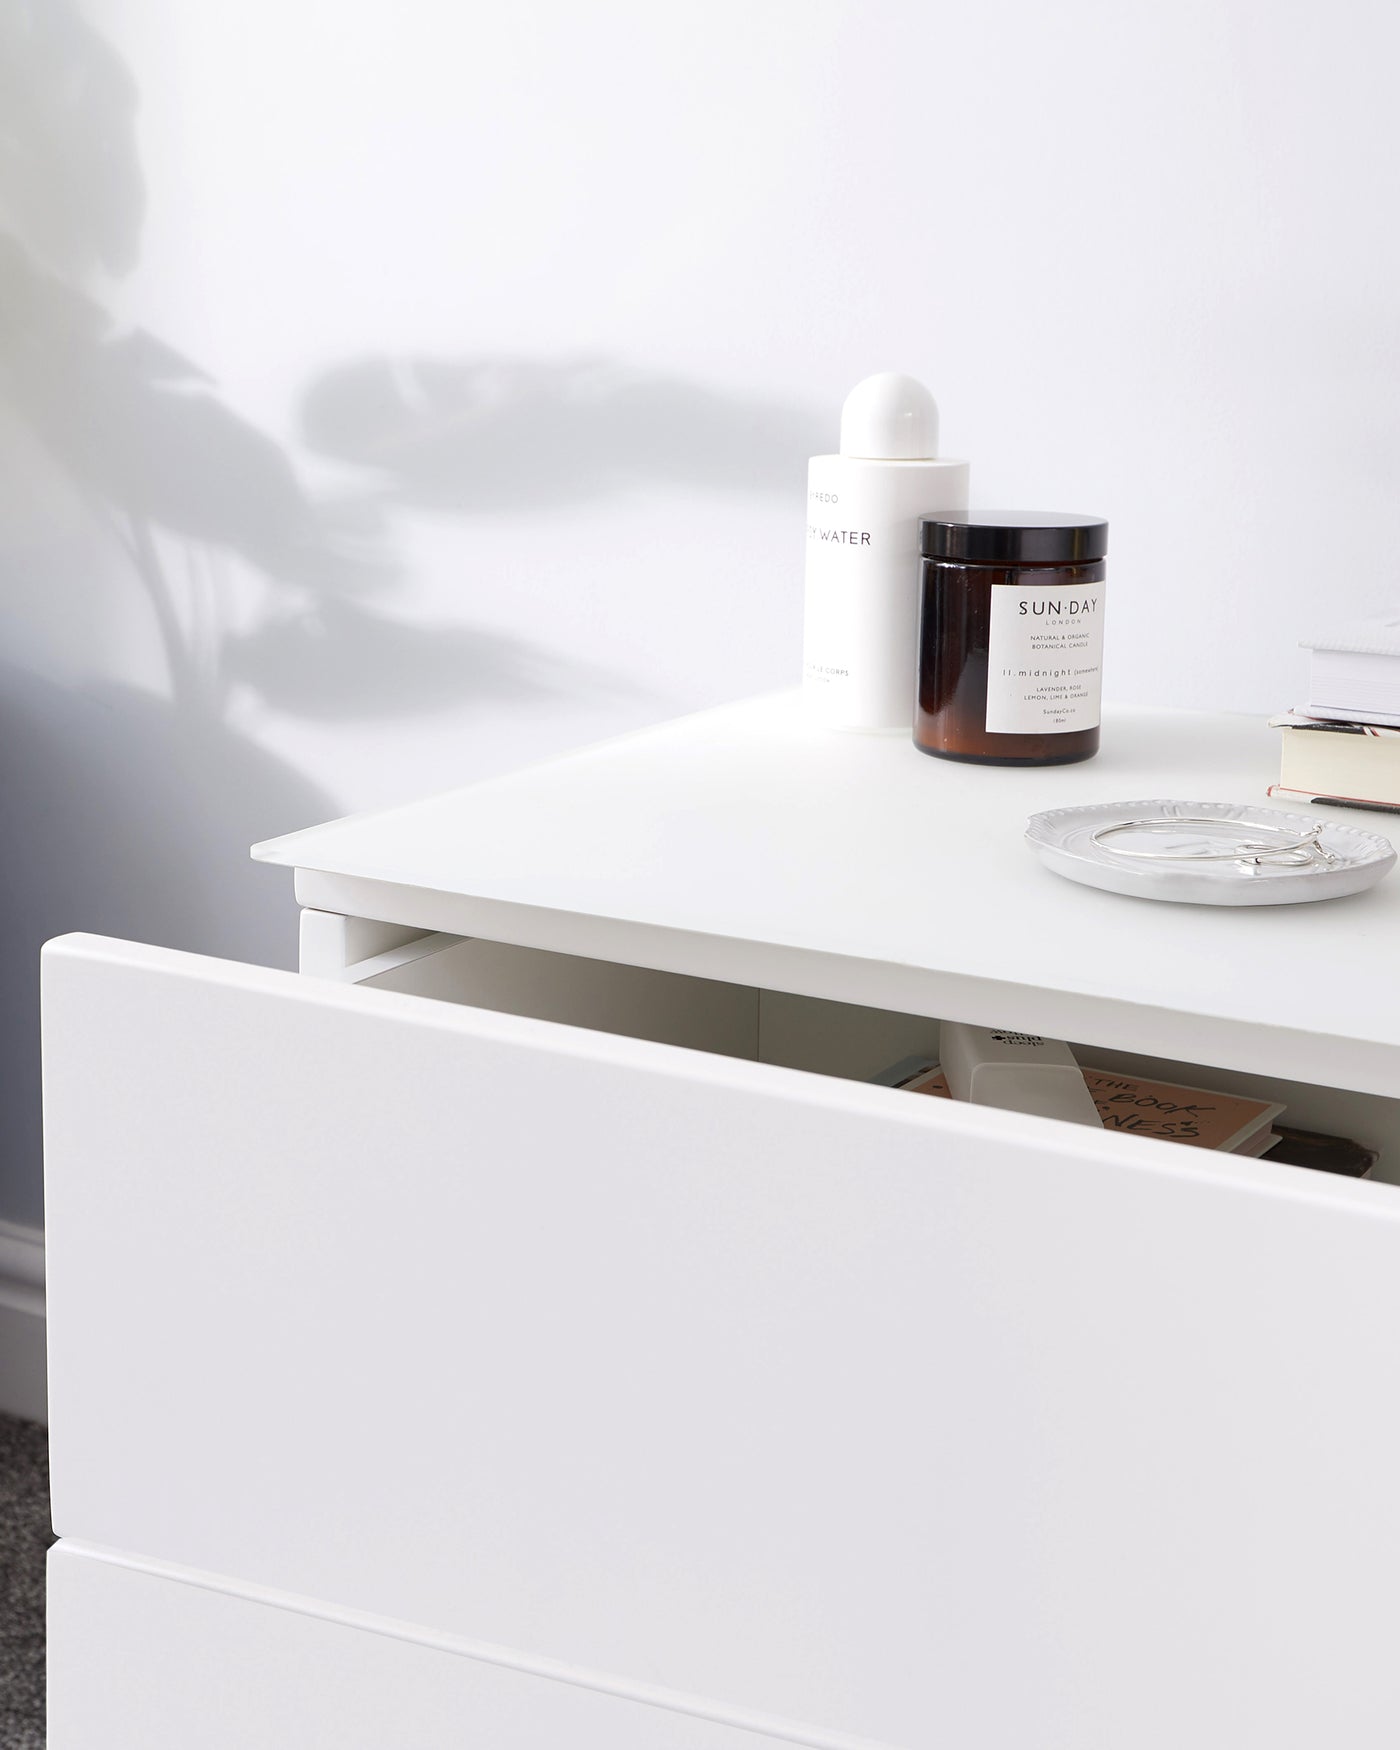 Modern white dresser with clean lines featuring an open upper shelf and two closed drawers. The upper shelf displays a couple of cosmetic jars and a stack of books, showing the piece's functional use for storage and display.